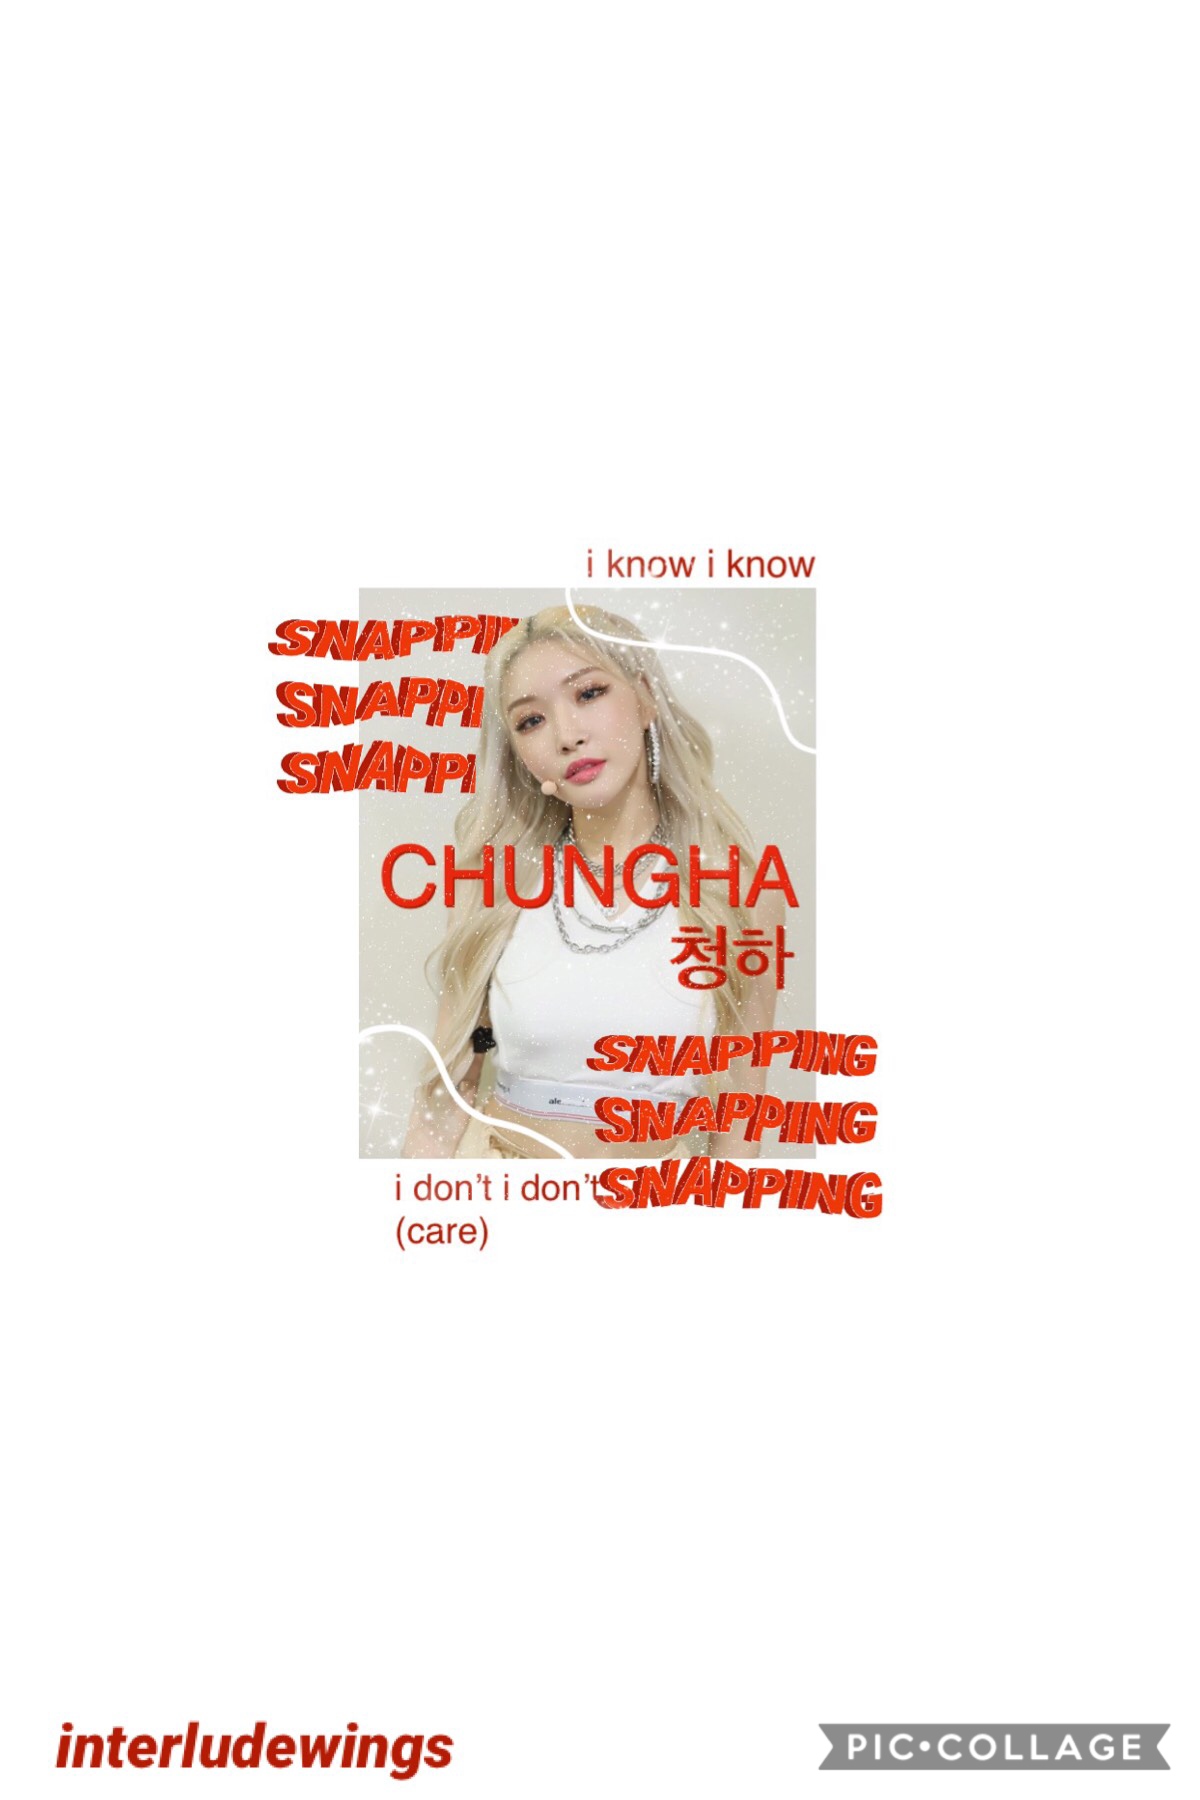 💥 open 💥
chungha 
pc has been kinda dead lately so i don’t have much motivation to edit but i’ll try my best to post!(also this is kinda ugly but sometimes it be like that 😥) 